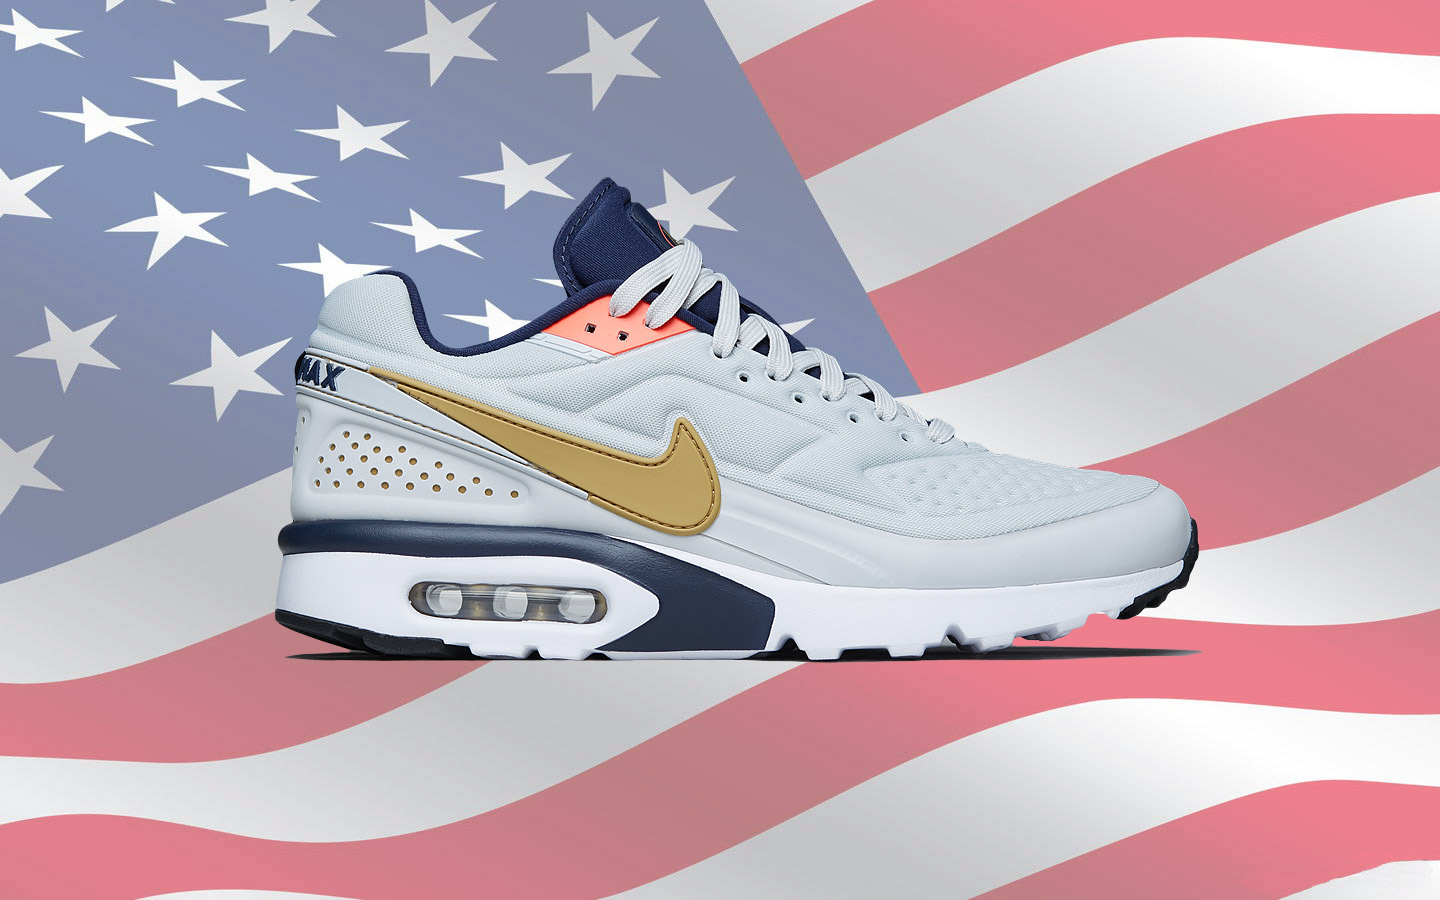 Nike Chaussures Air Max Bw Olympic Usa Nike